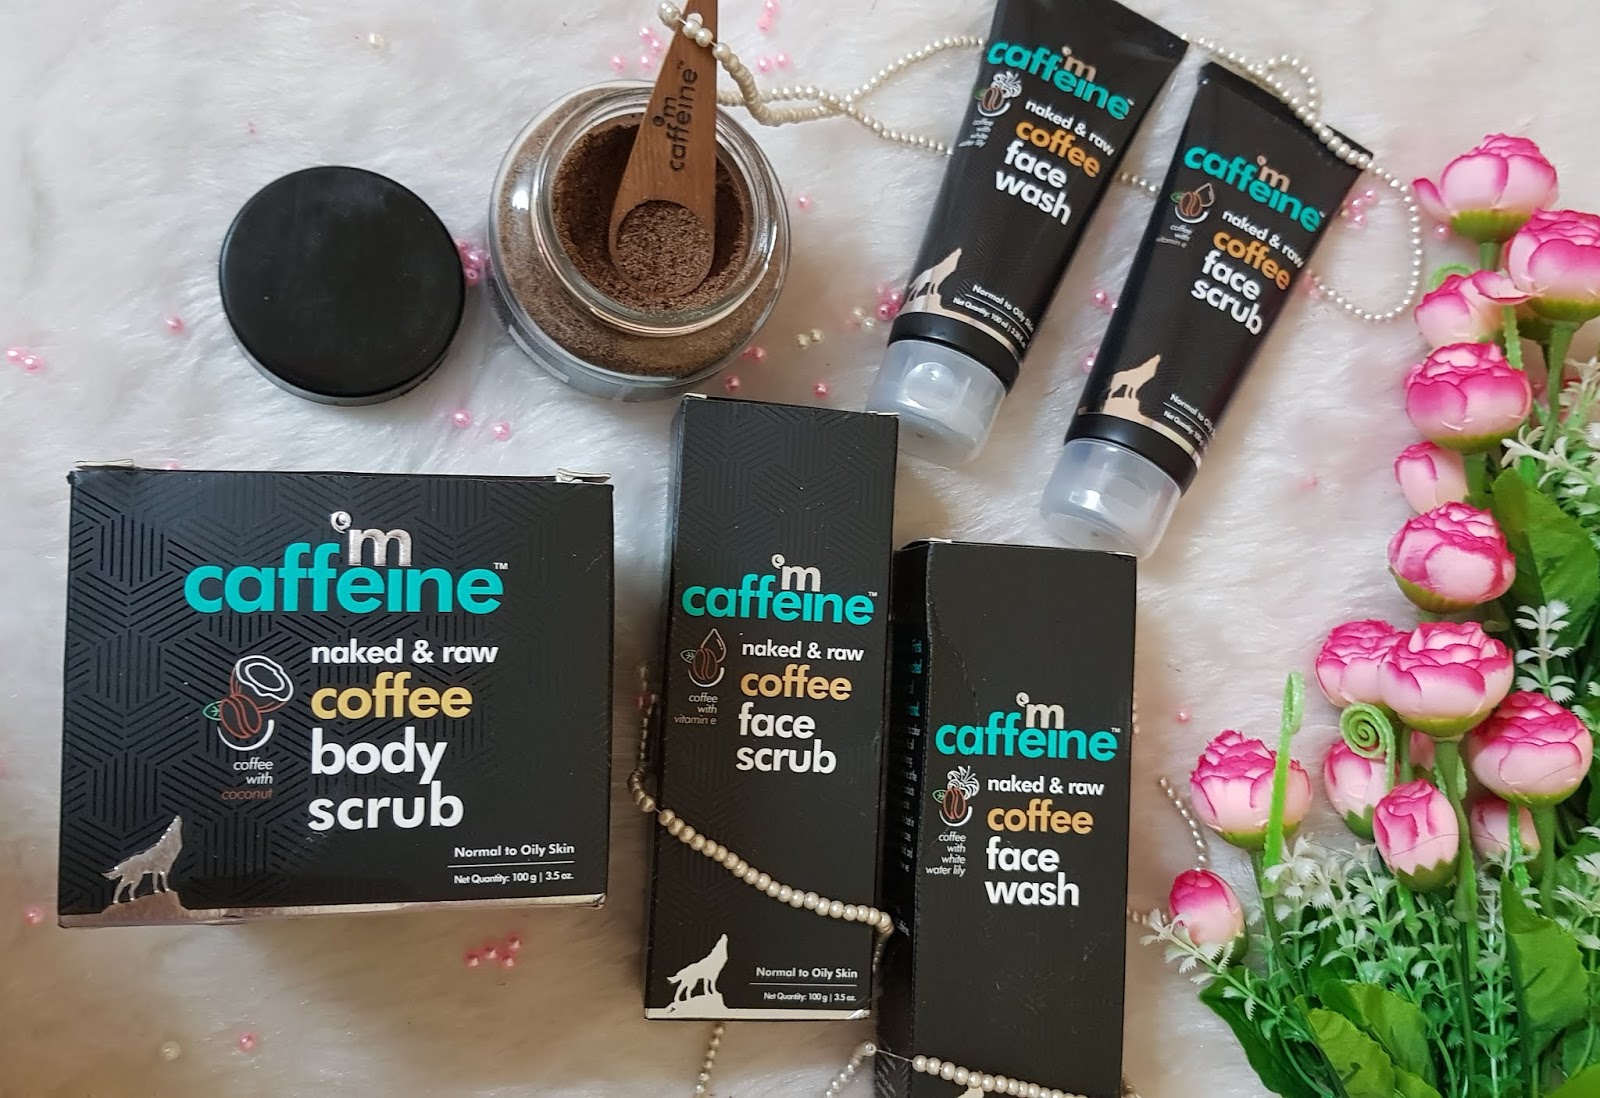 Mcaffeine is India’s 1st​ caffeinated personal care brand